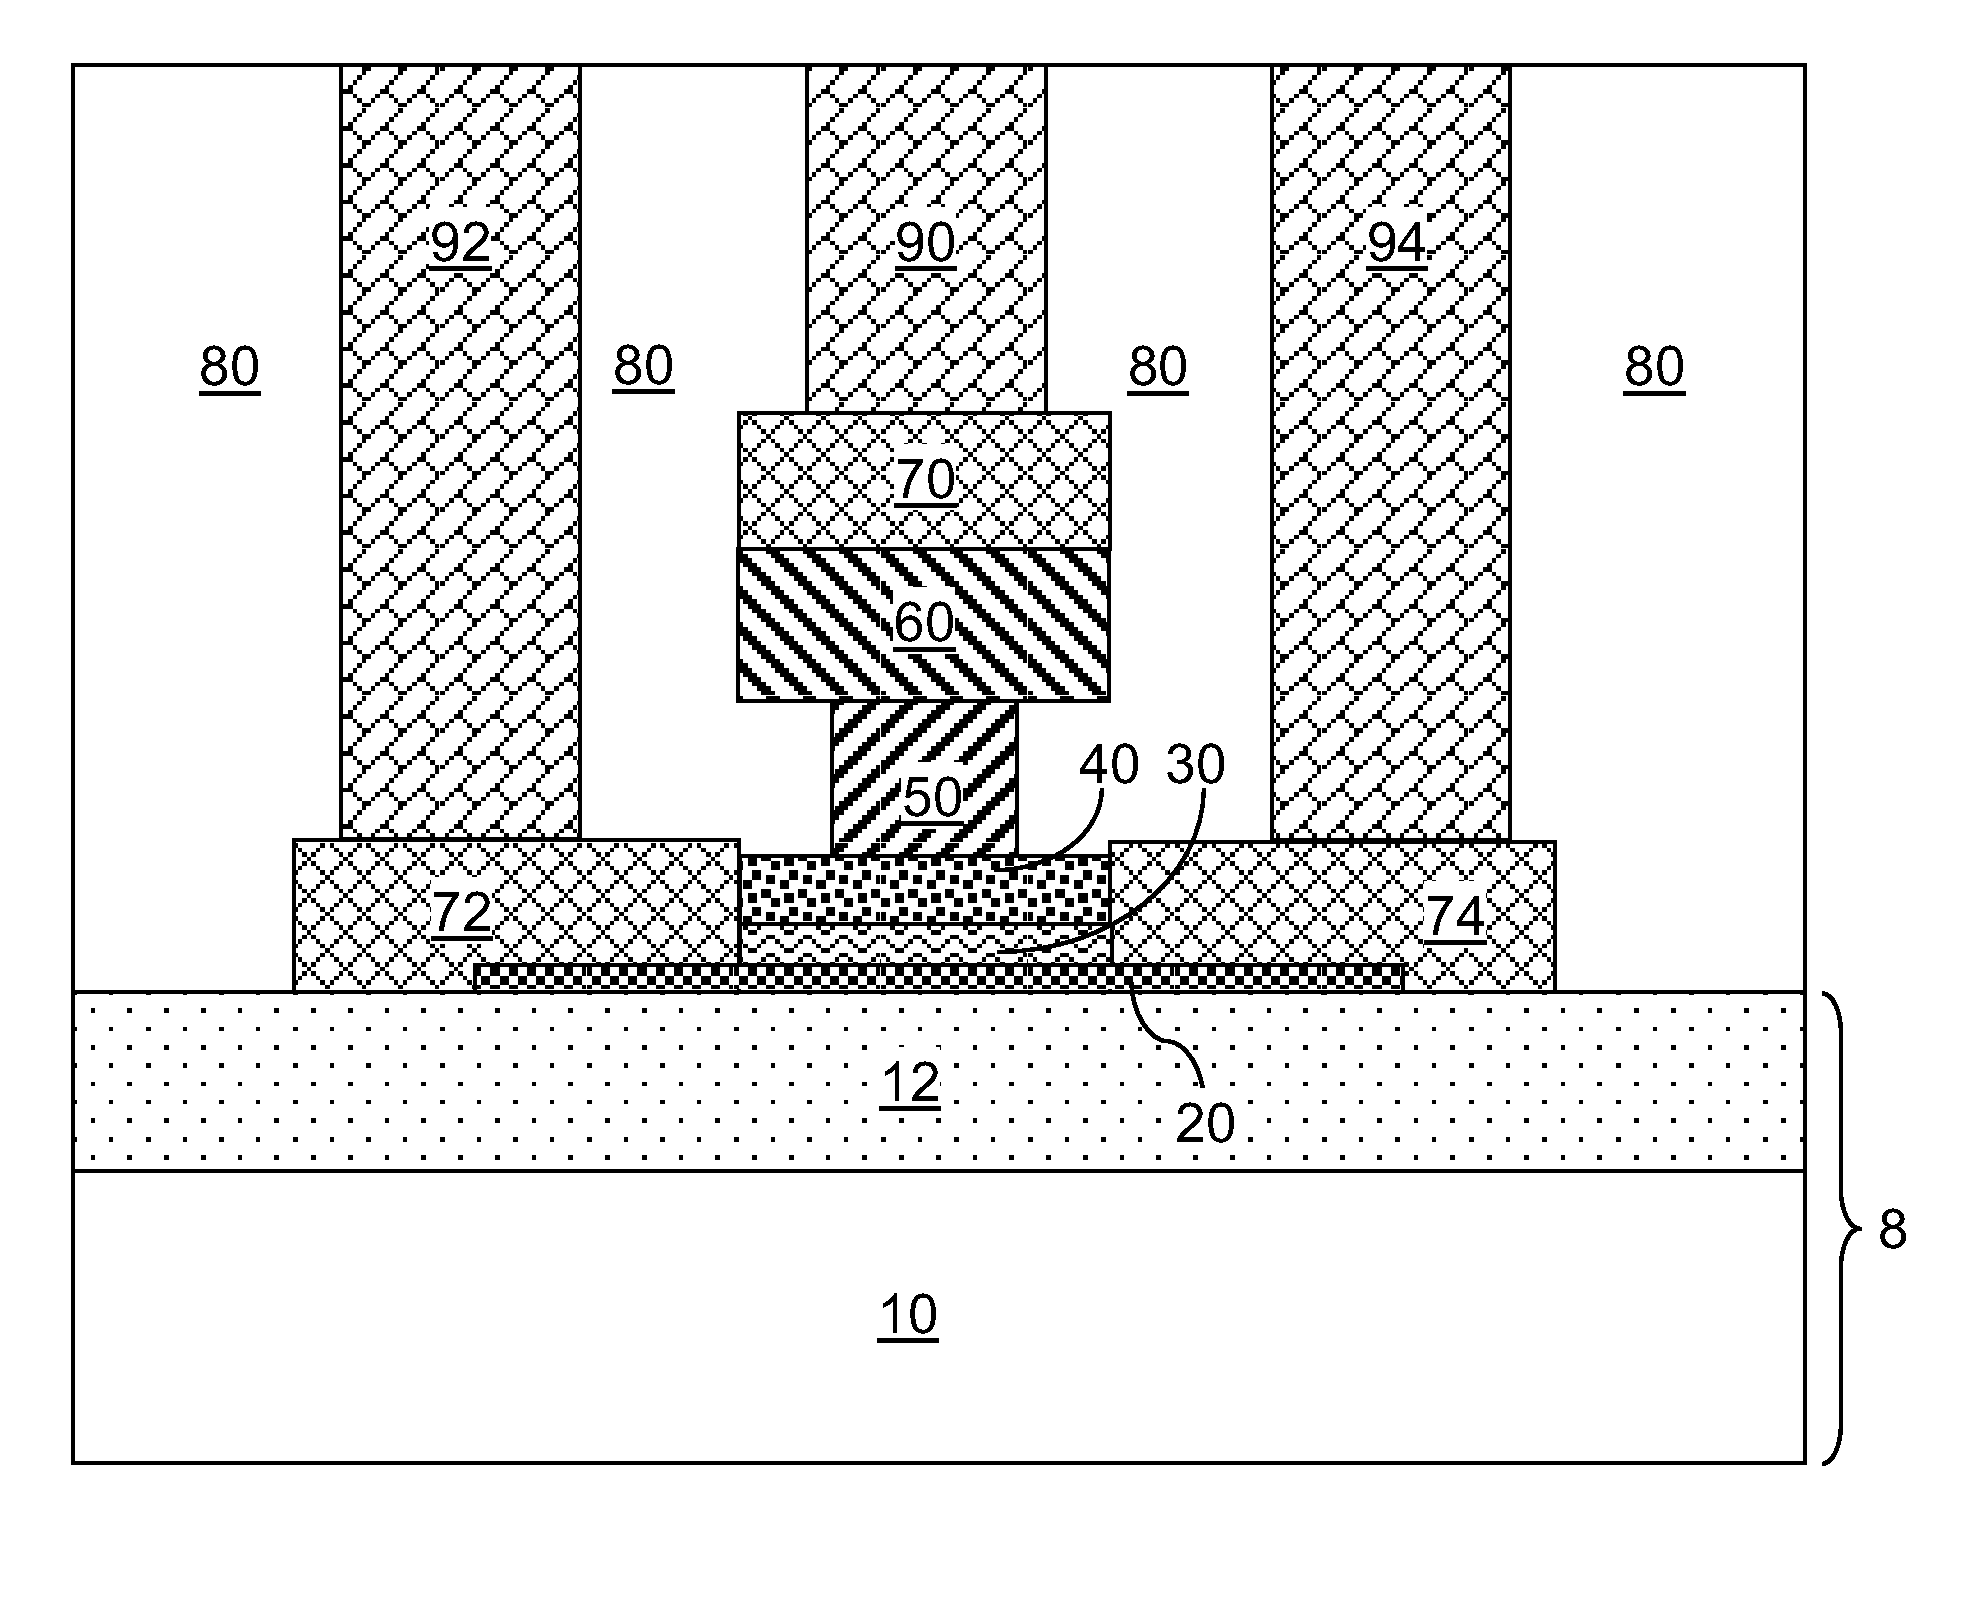 Graphene transistor with a self-aligned gate